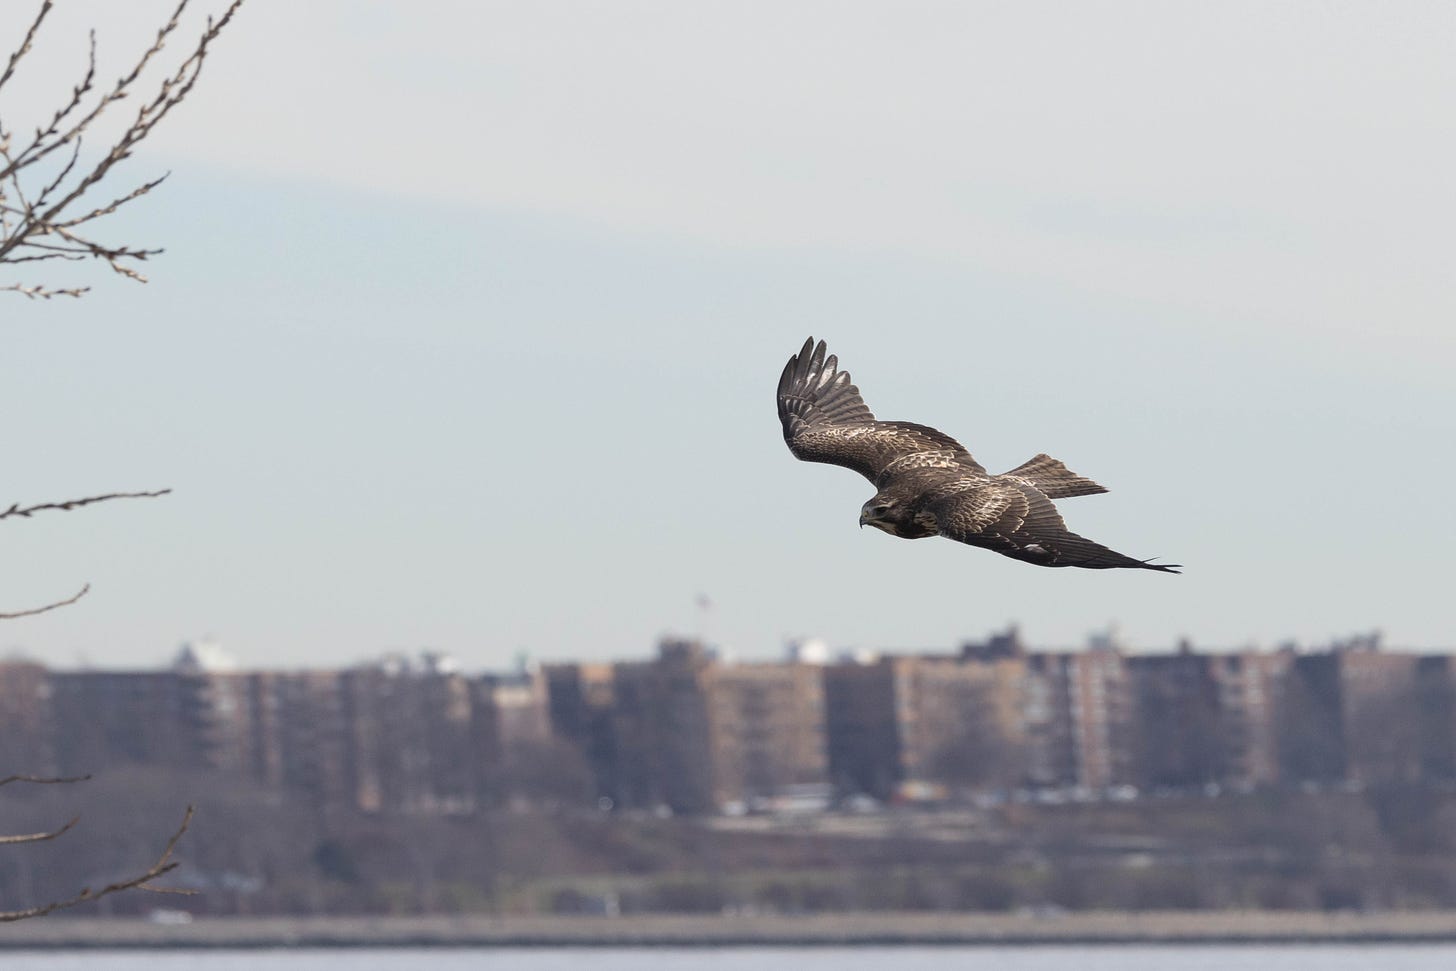 the same hawk as the previous picture flying to the left against a blue sky, with blurry brown apartment buildings in the background.